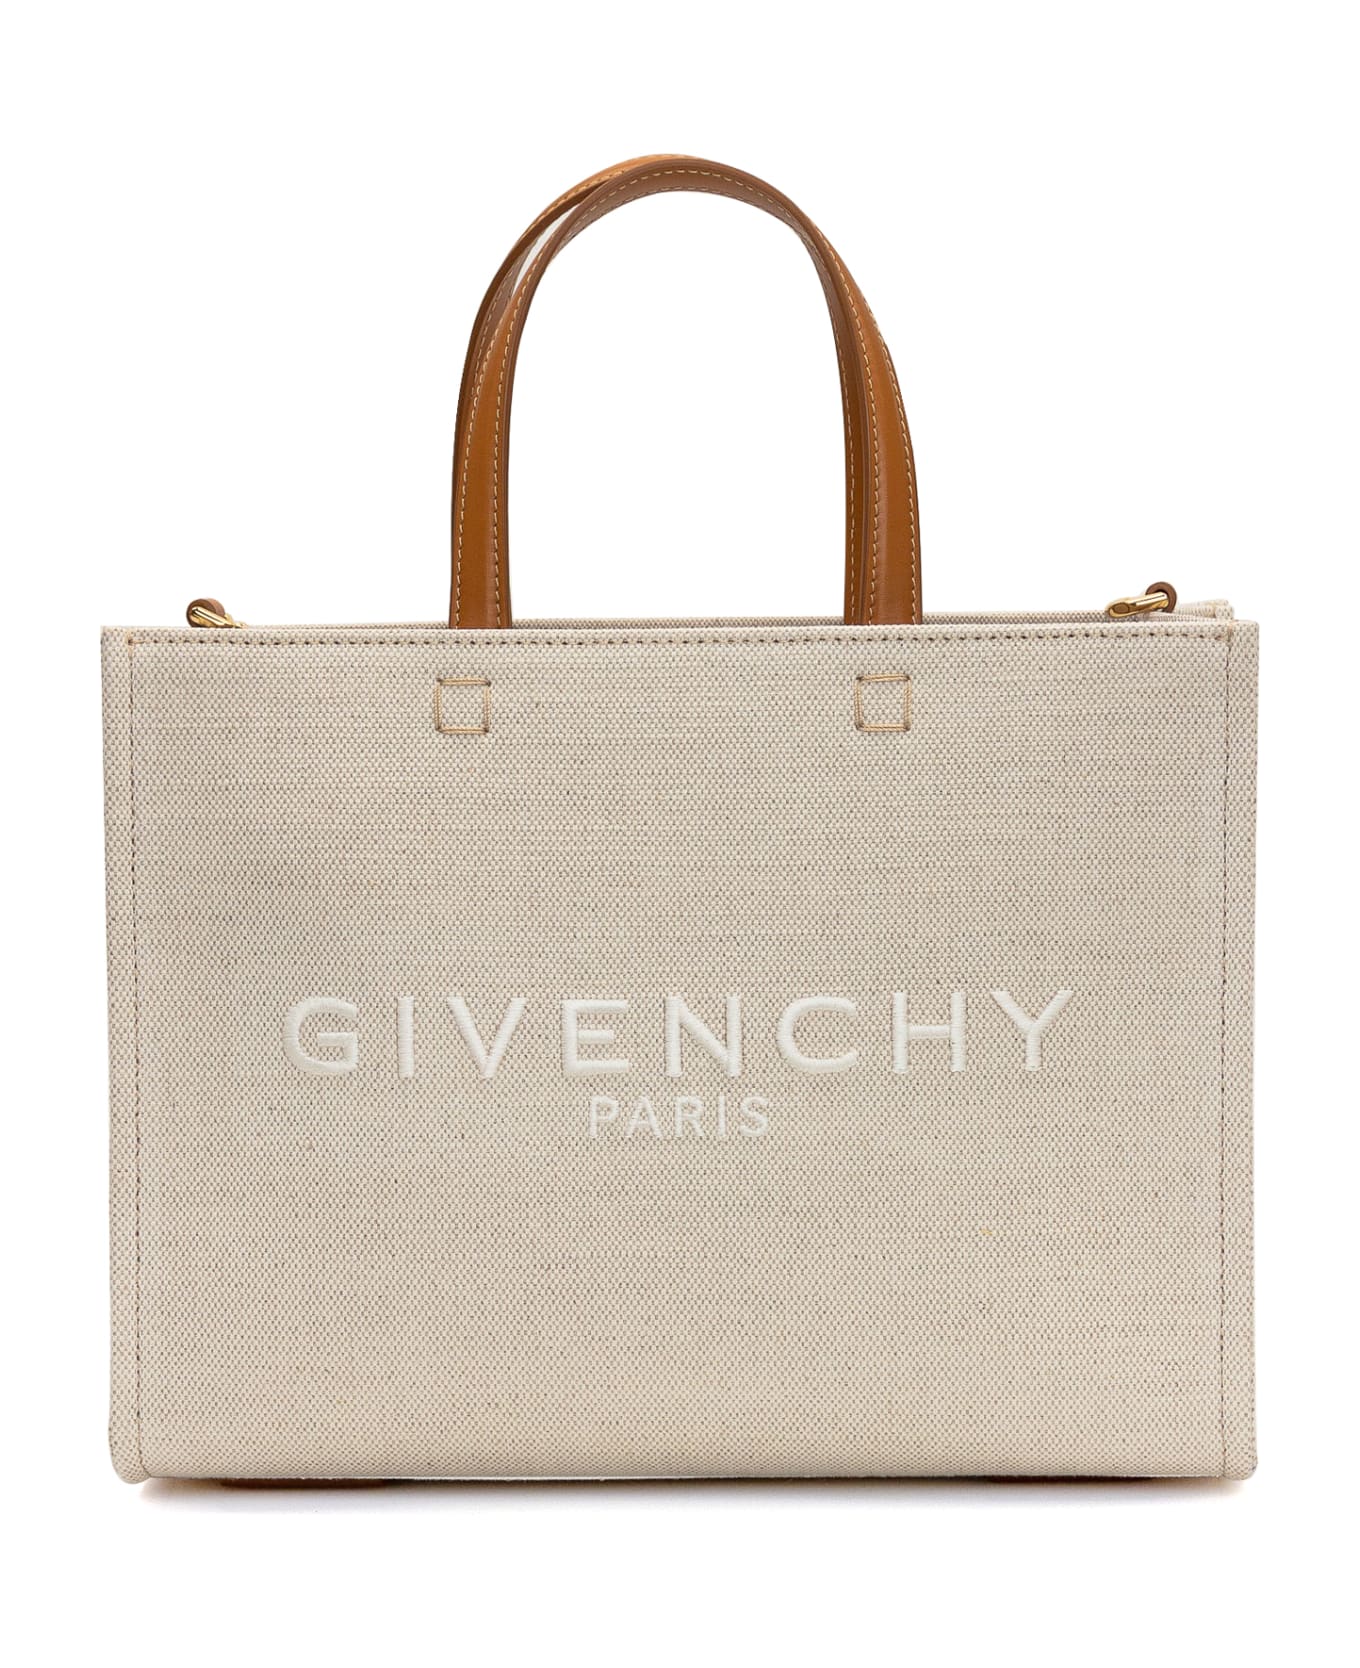 Givenchy G Tote Small Shopping Bag - NATURAL BEIGE トートバッグ